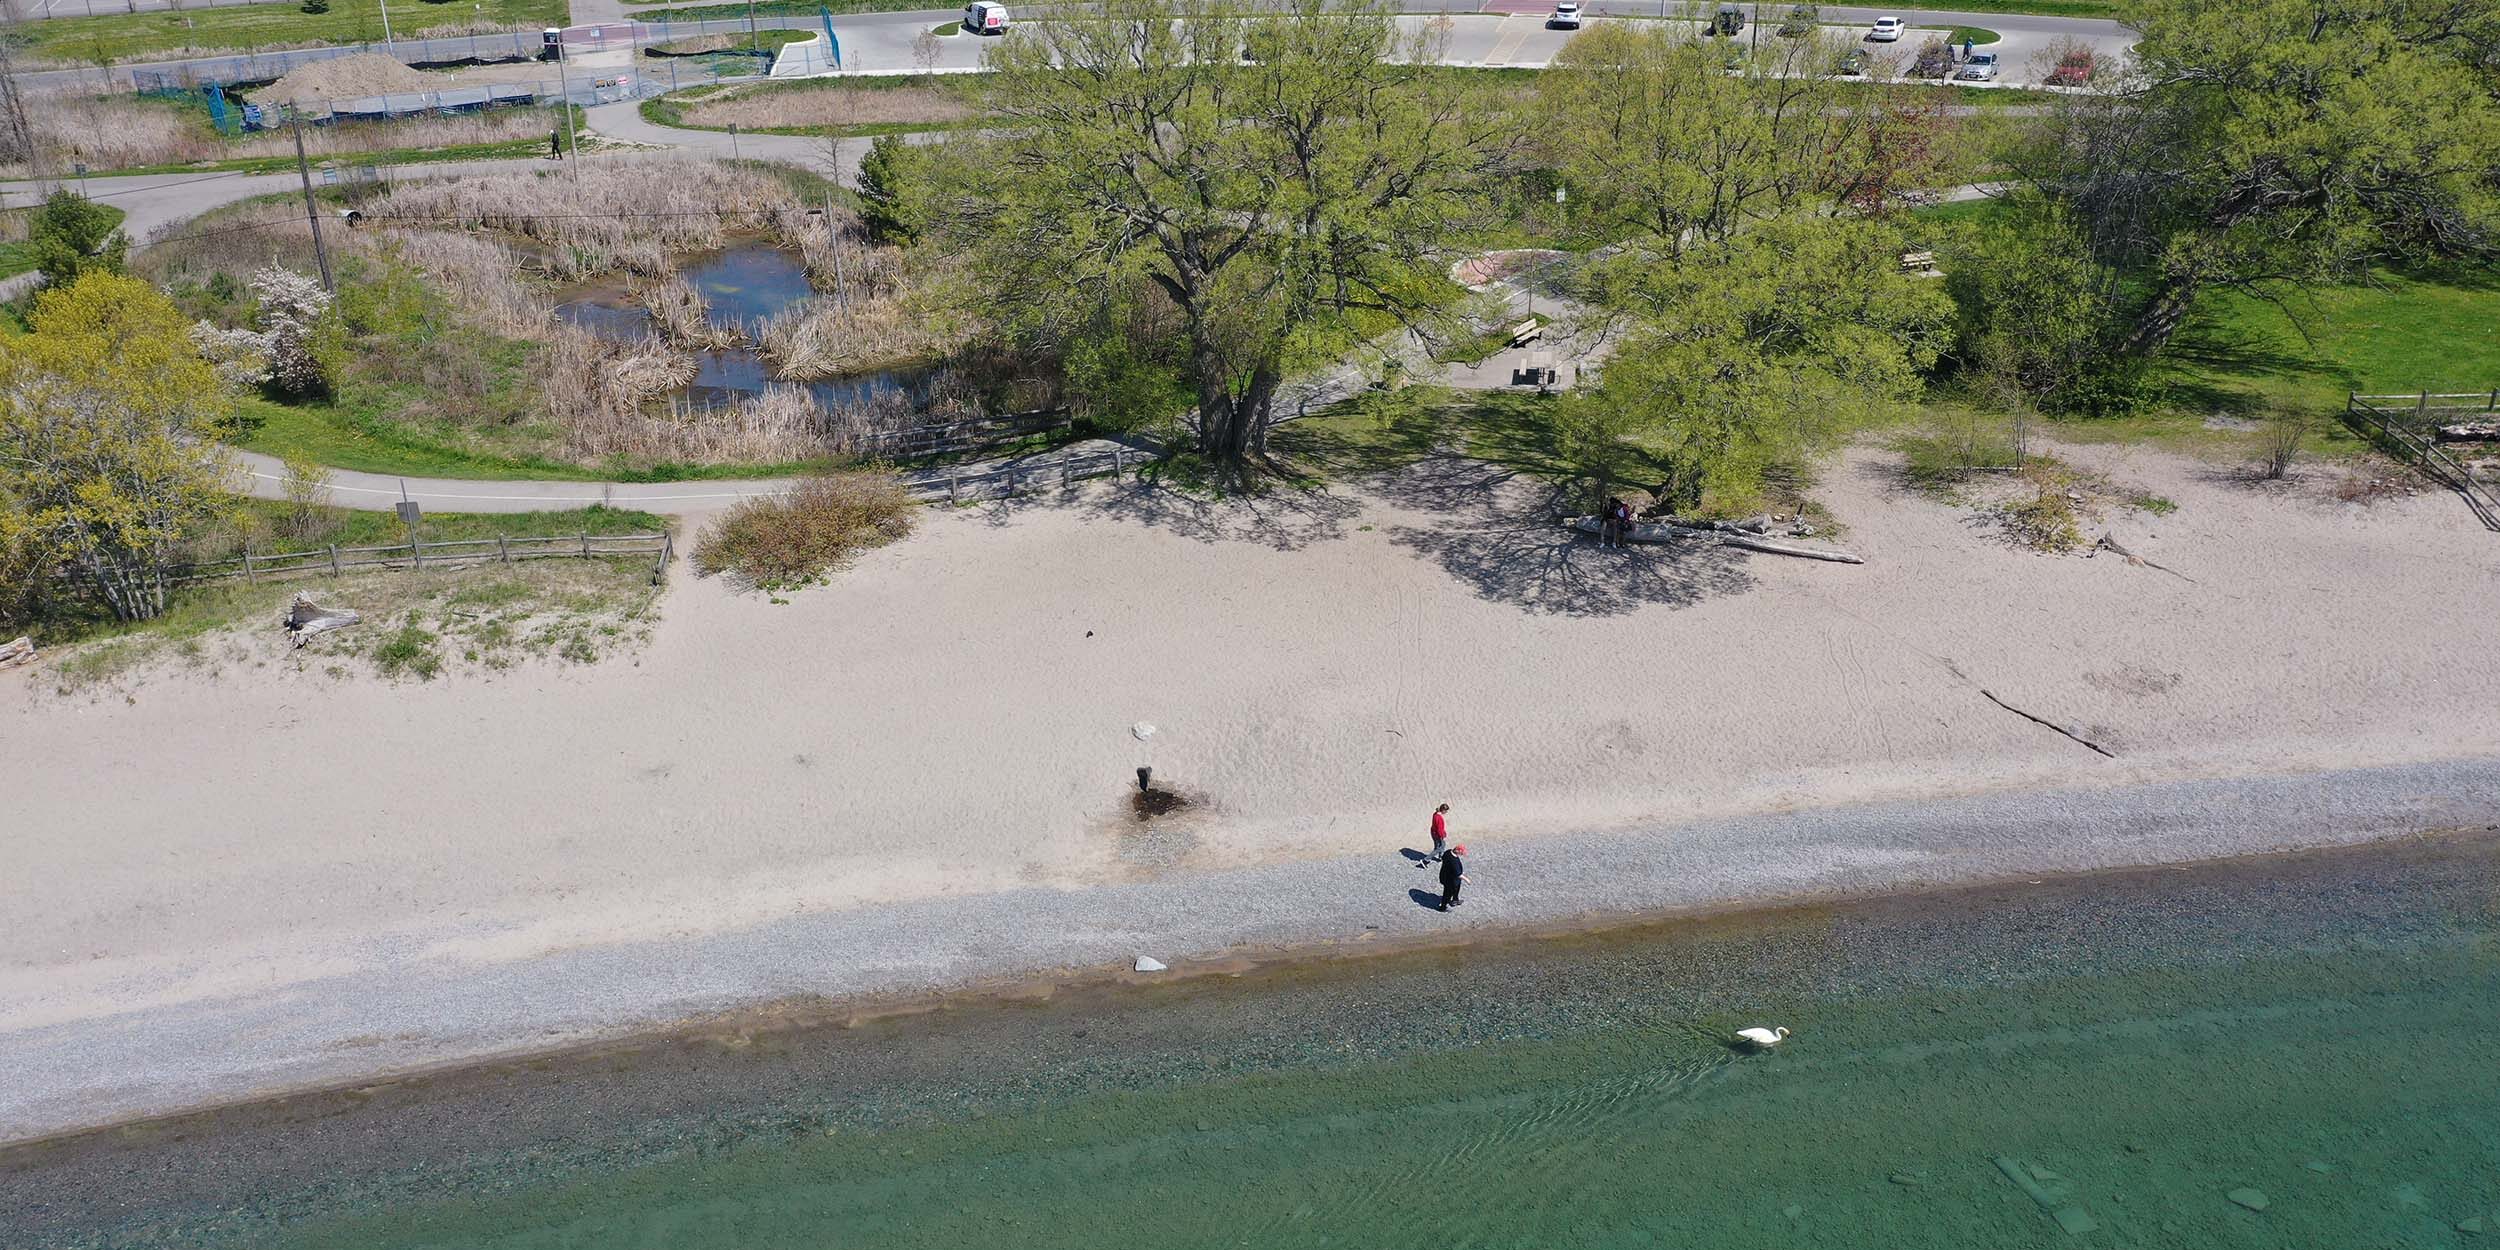 Aerial view of Paradise Beach taken from over Lake Ontario, with a parking lot and pond in the background. Two people are walking on the beach.